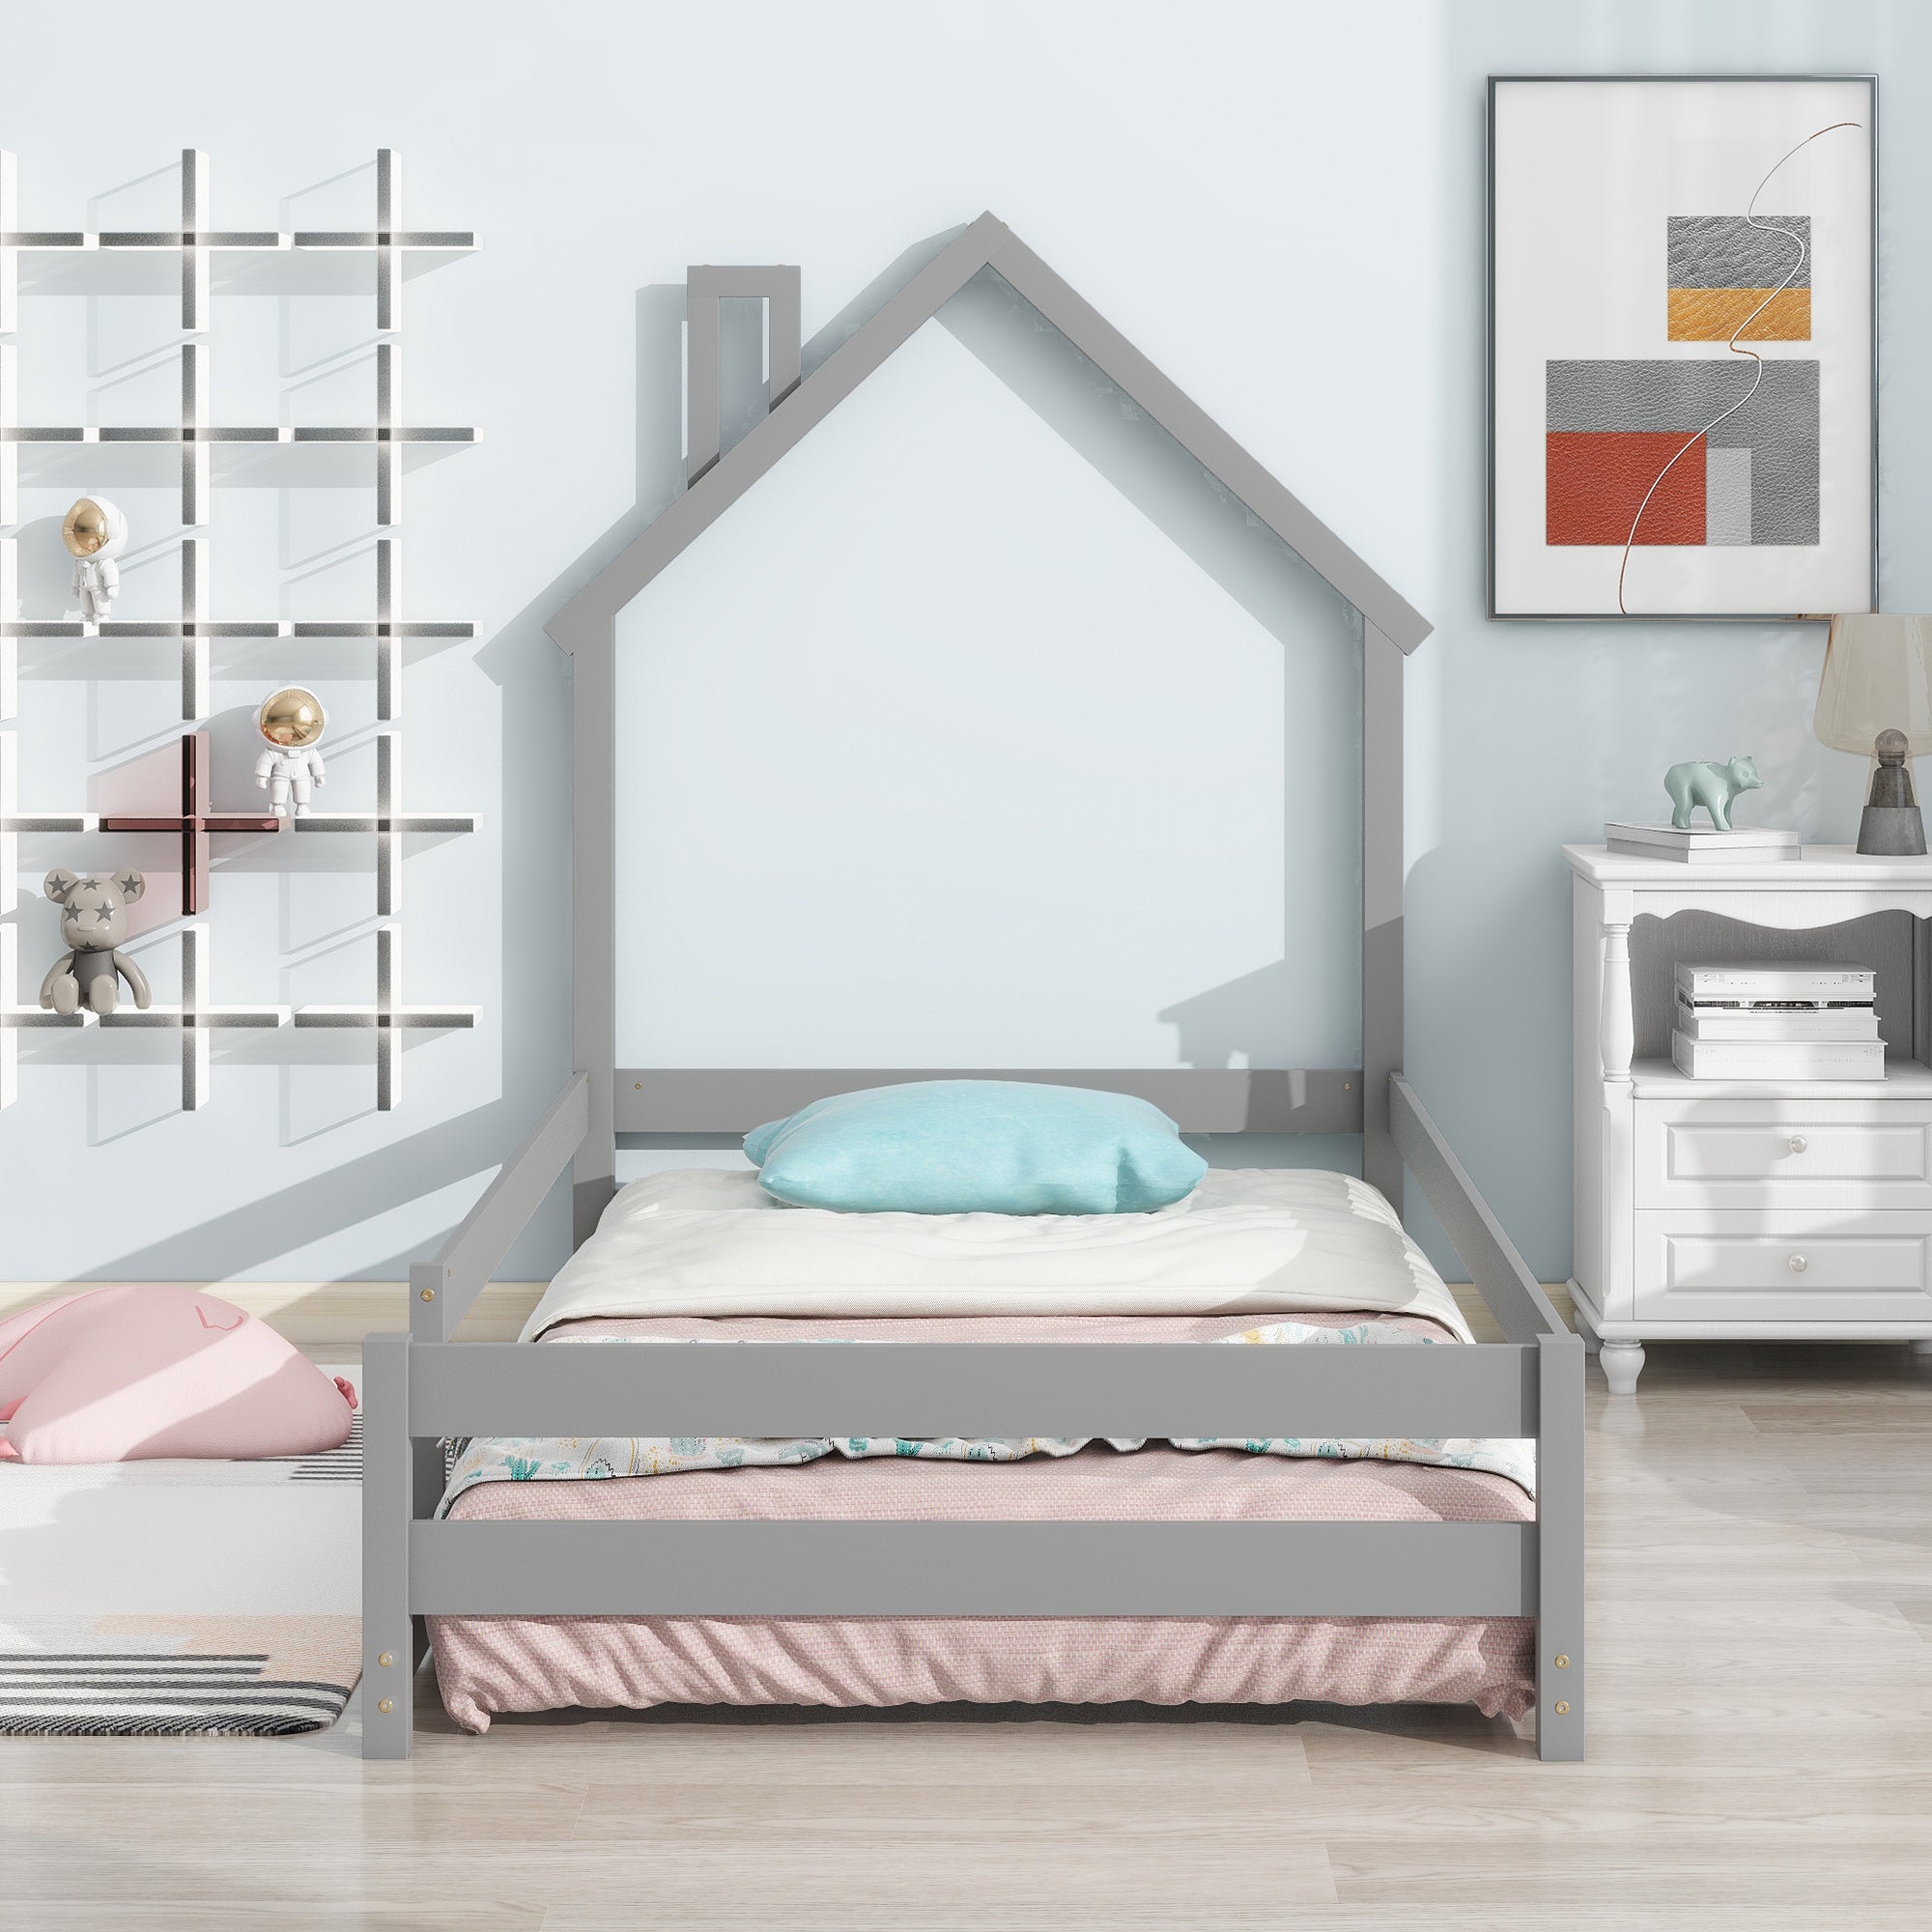 Twin Size Wood bed with House-shaped Headboard Floor bed with Fences,Grey